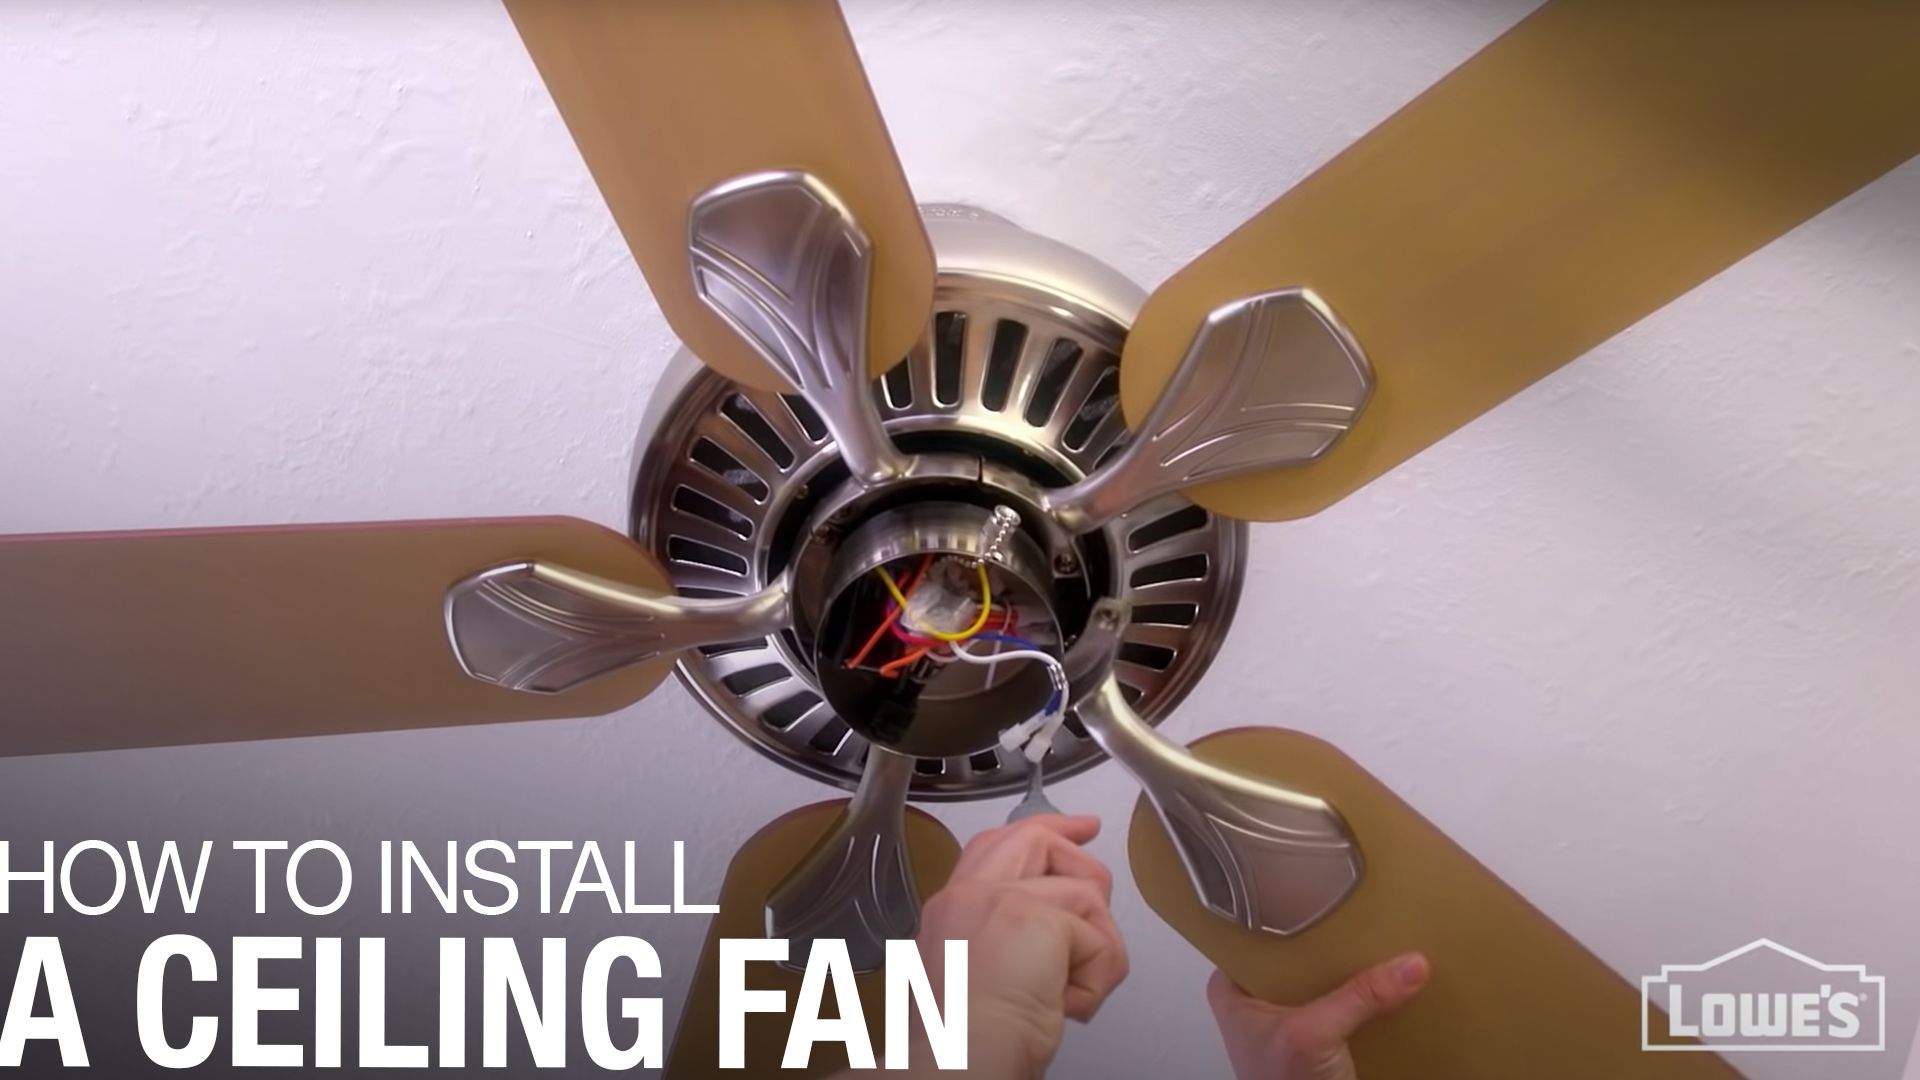 How To Install A Ceiling Fan Lowe S, Can You Put Led Bulbs In Ceiling Fans